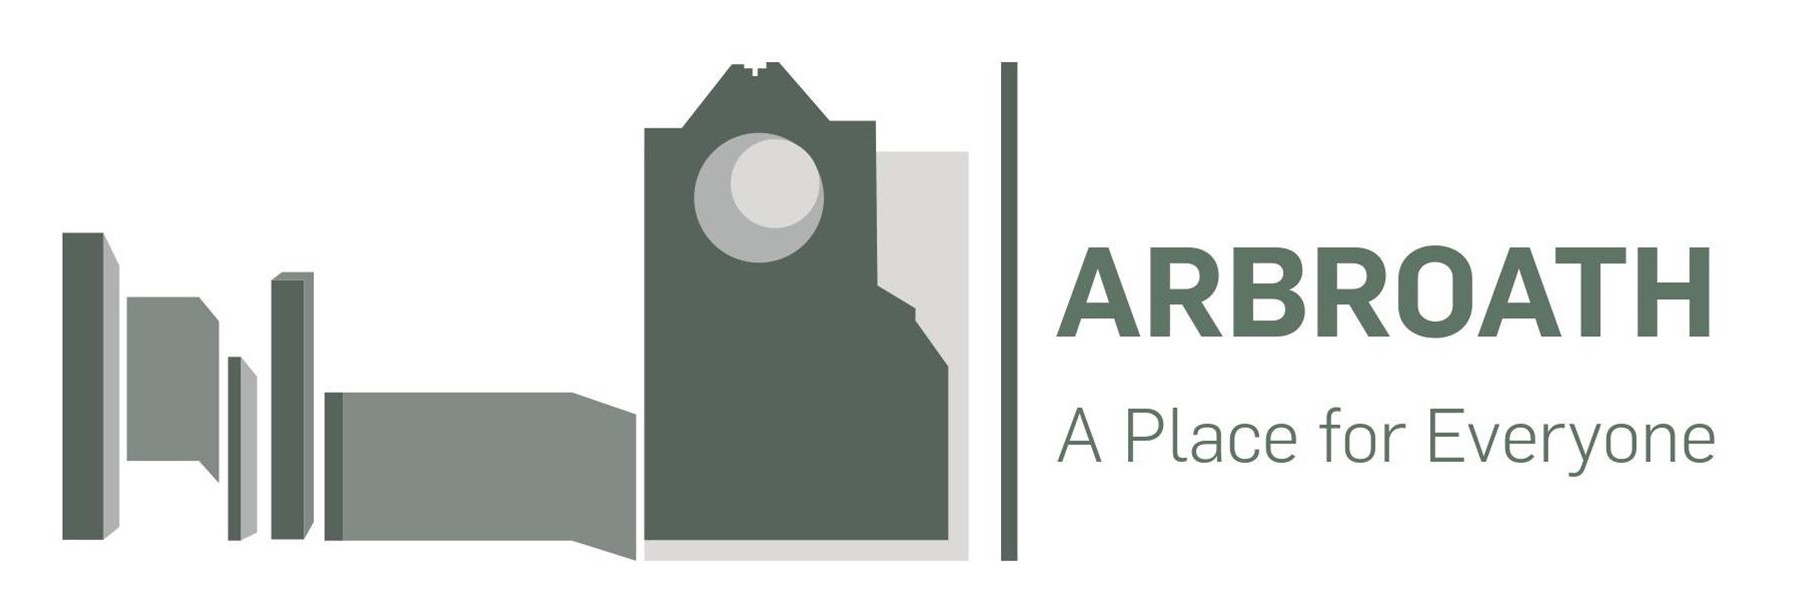 Angus Council appoints Arcadis as design consultant of Arbroath project